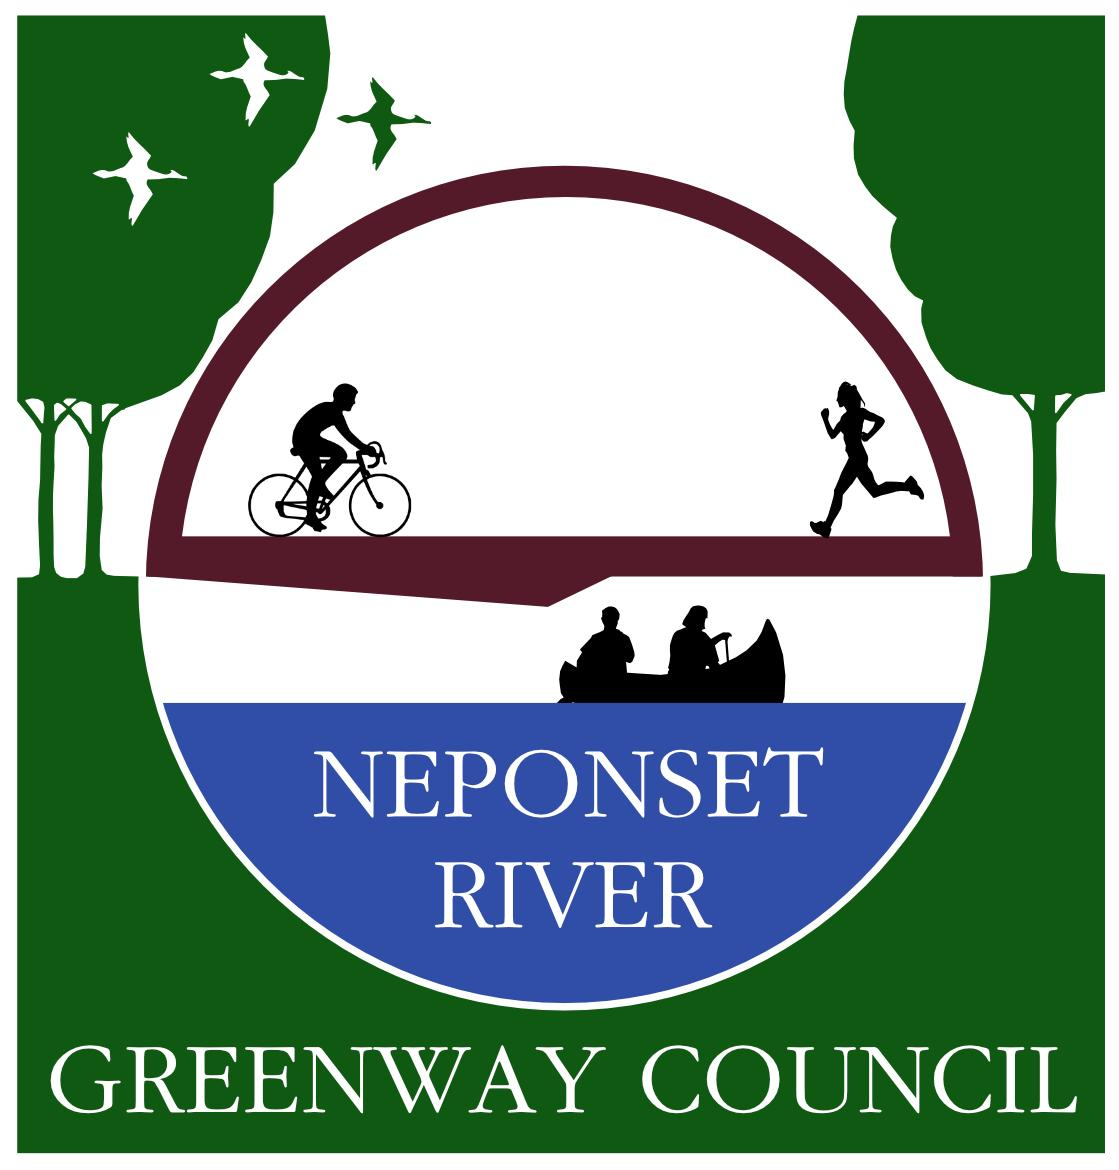 Neponset River Greenway Council Logo: river, canoe, bridge, bicyclist, runner, trees